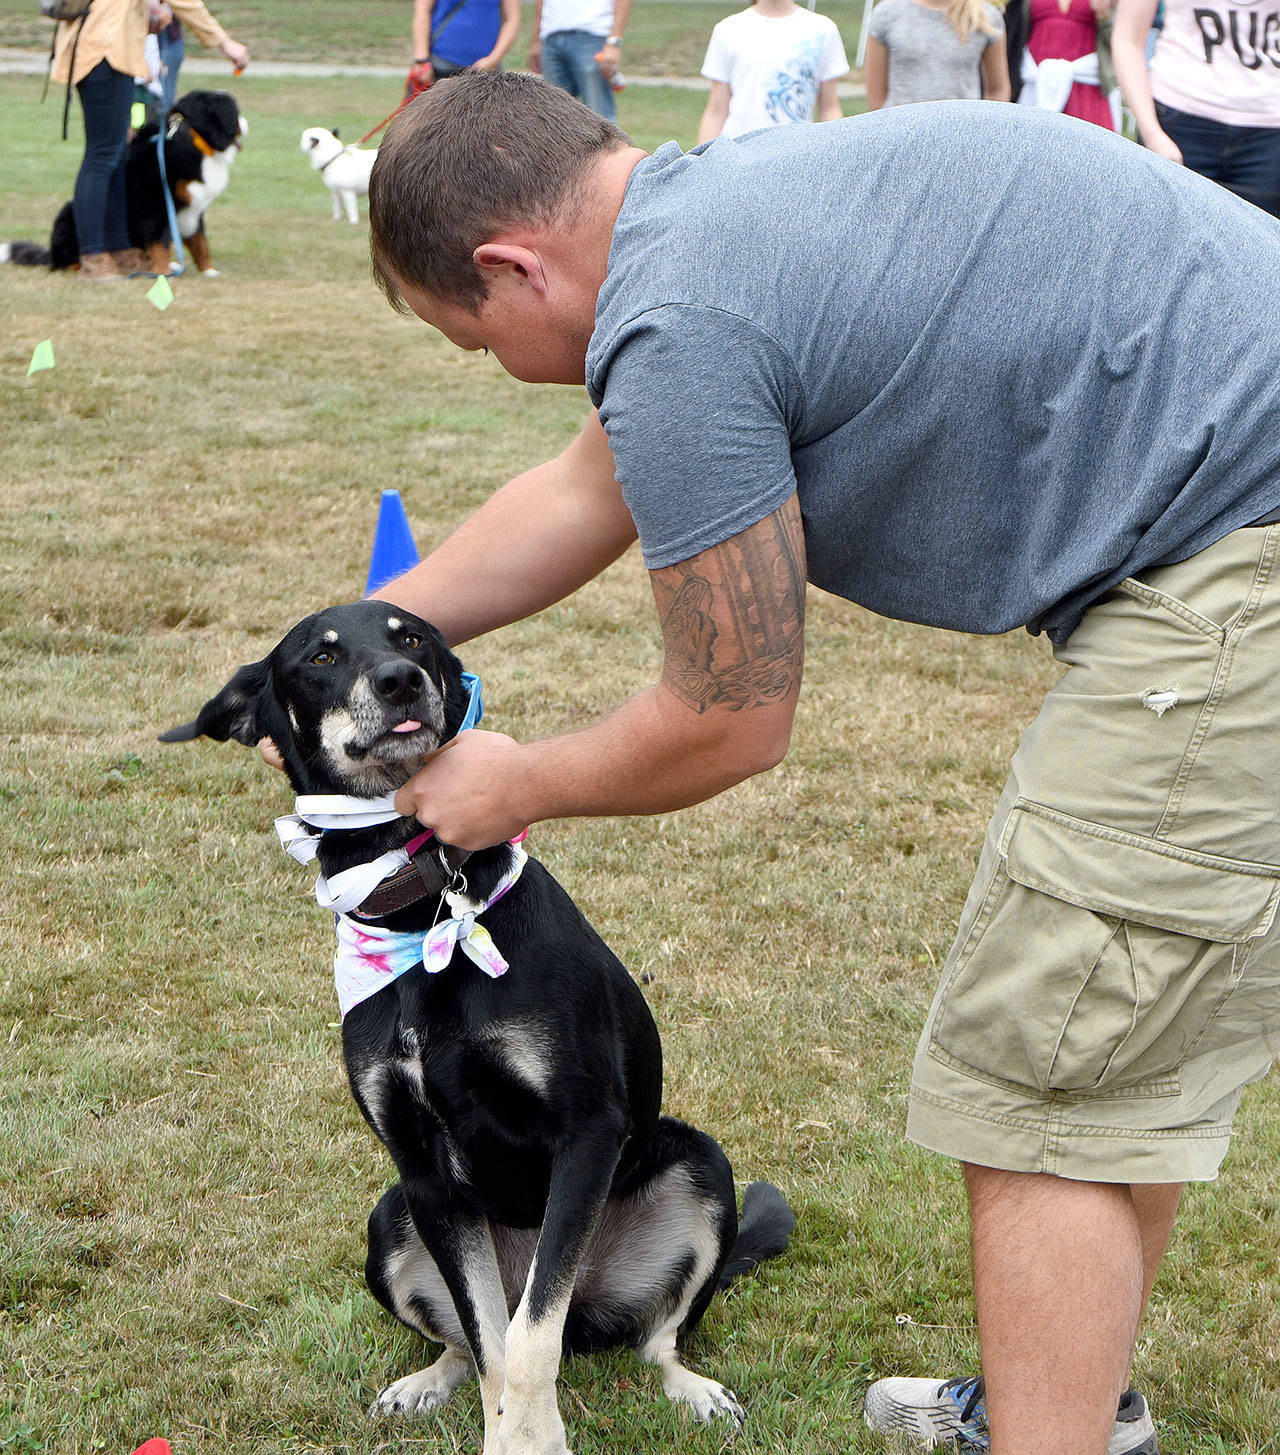 Aaron Cowling of North Bend, dresses his dog, Toby, in the Dress for Success contest. They took second place for taking the least time to get dressed and crossing the finish line with the most articles of clothing still on Toby.(Carol Ladwig/Staff Photo)